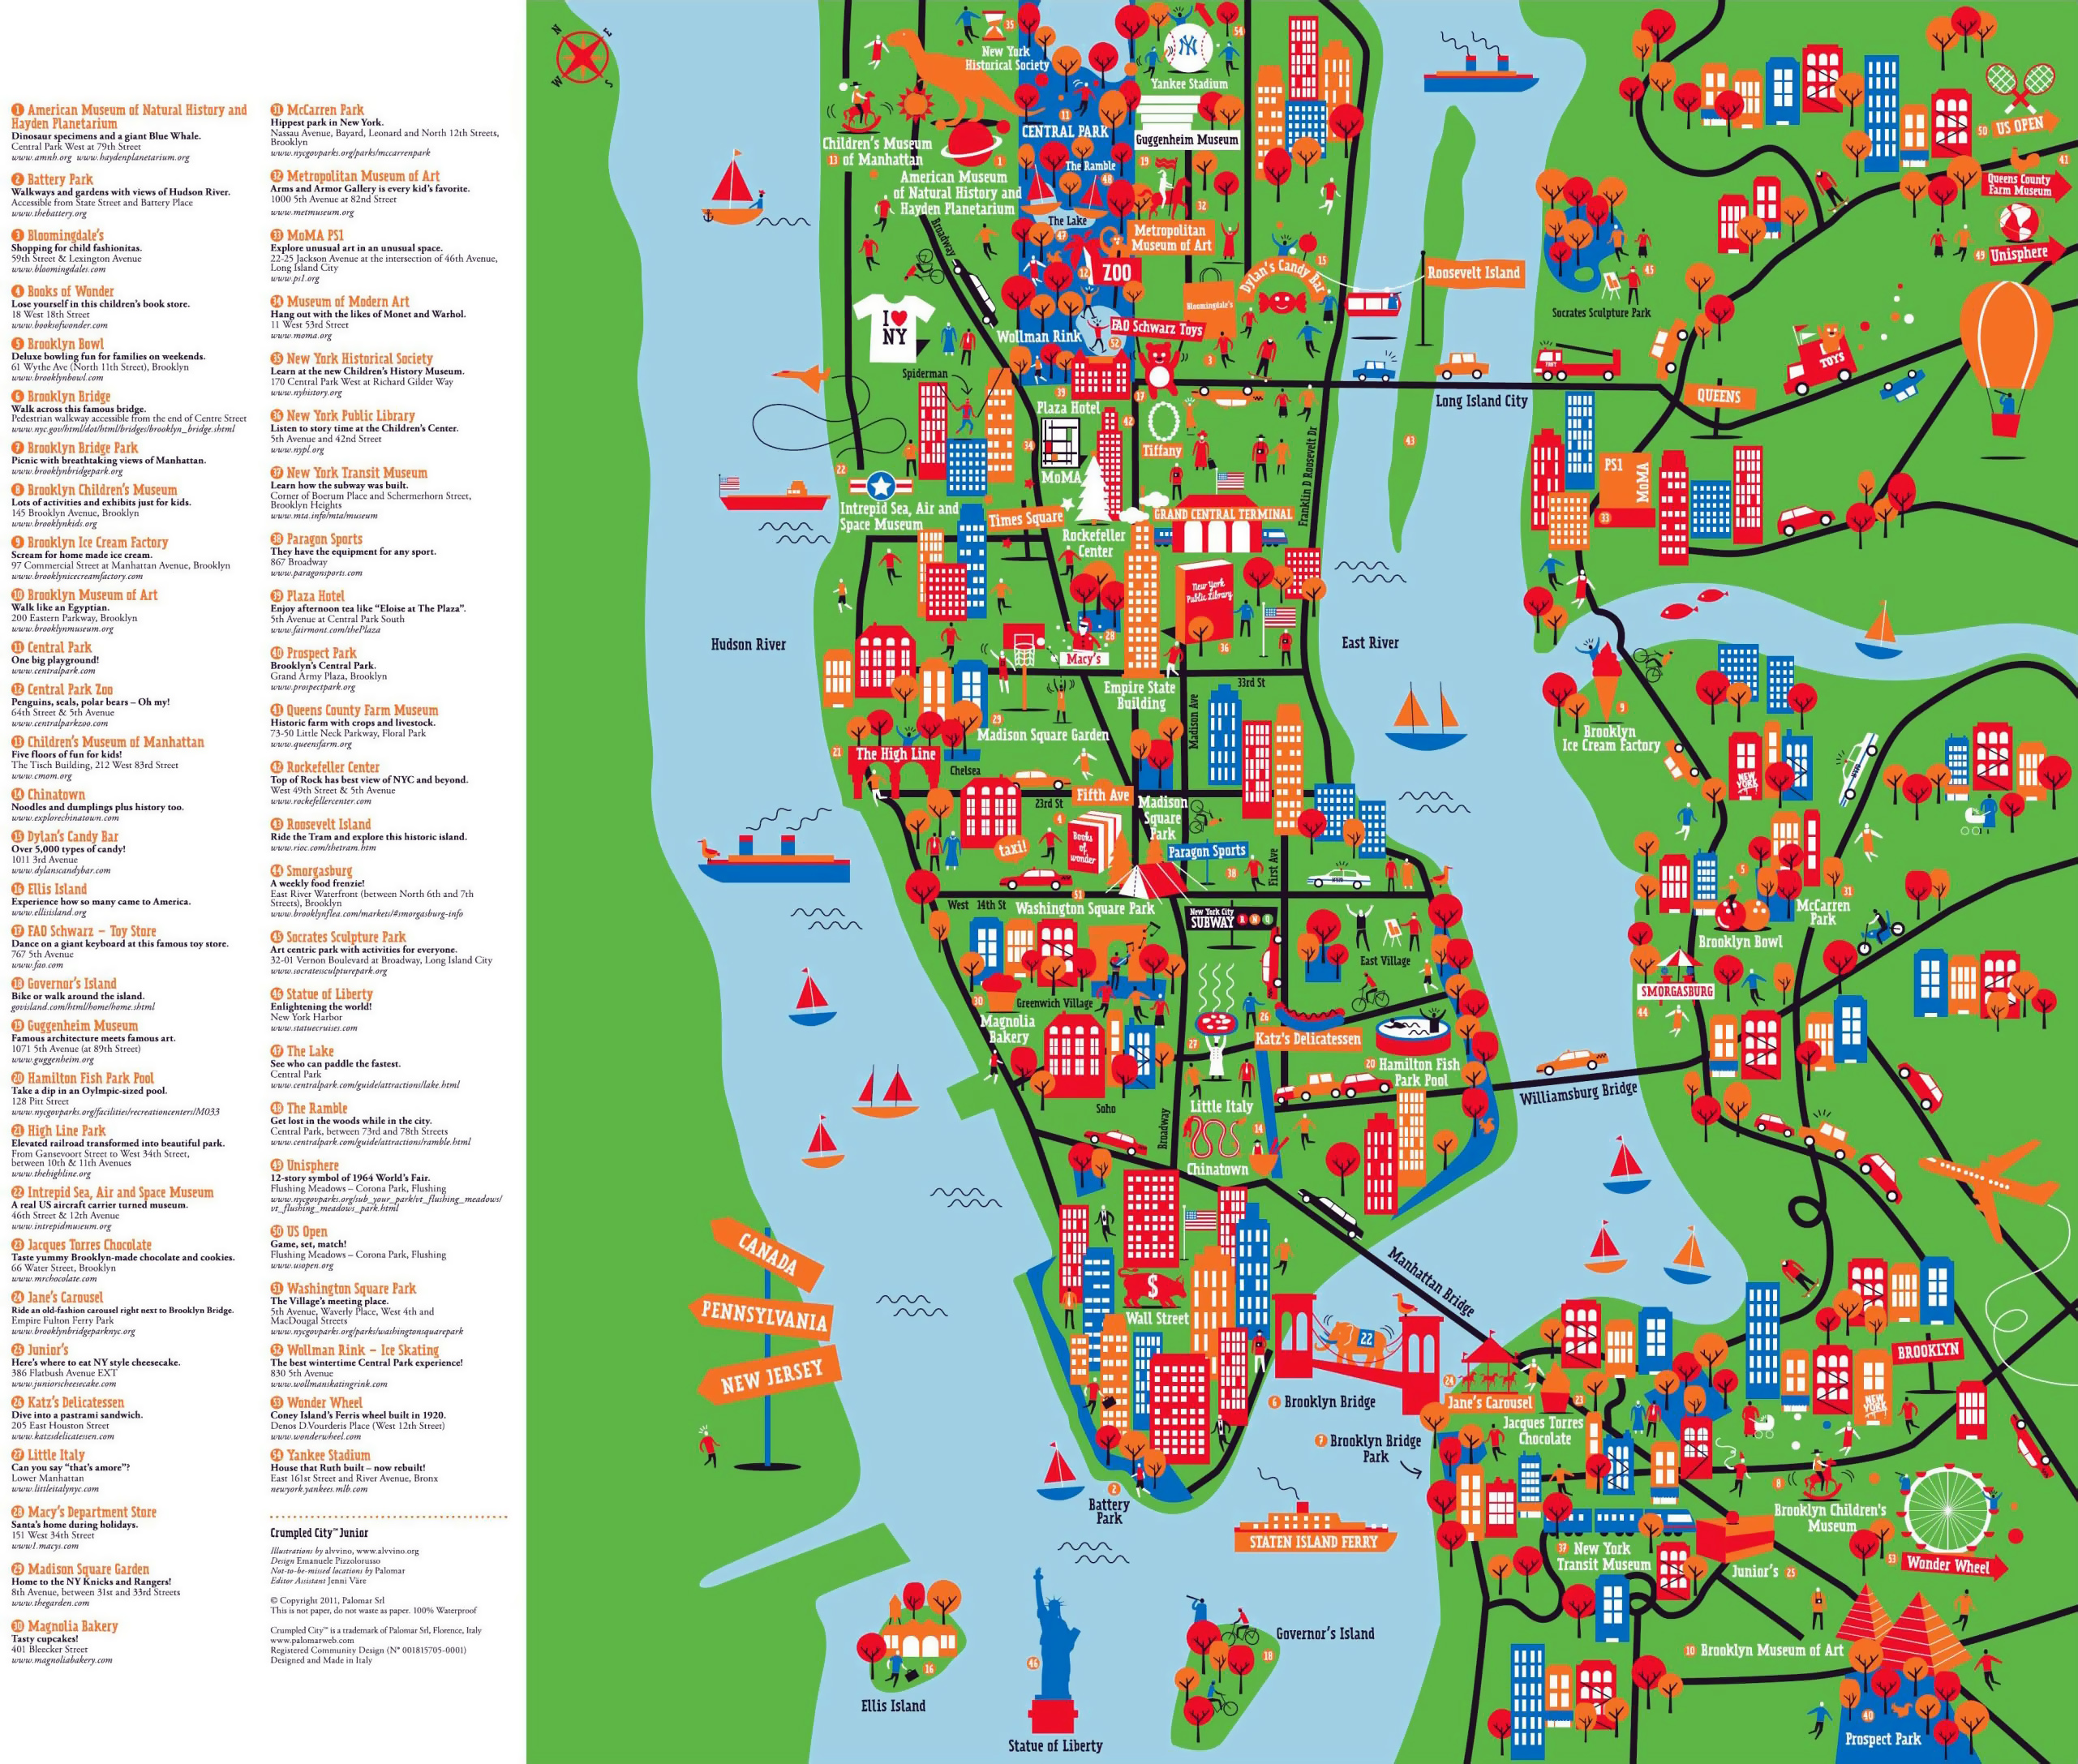 large-detailed-new-york-tourist-attractions-map-new-york-city-large